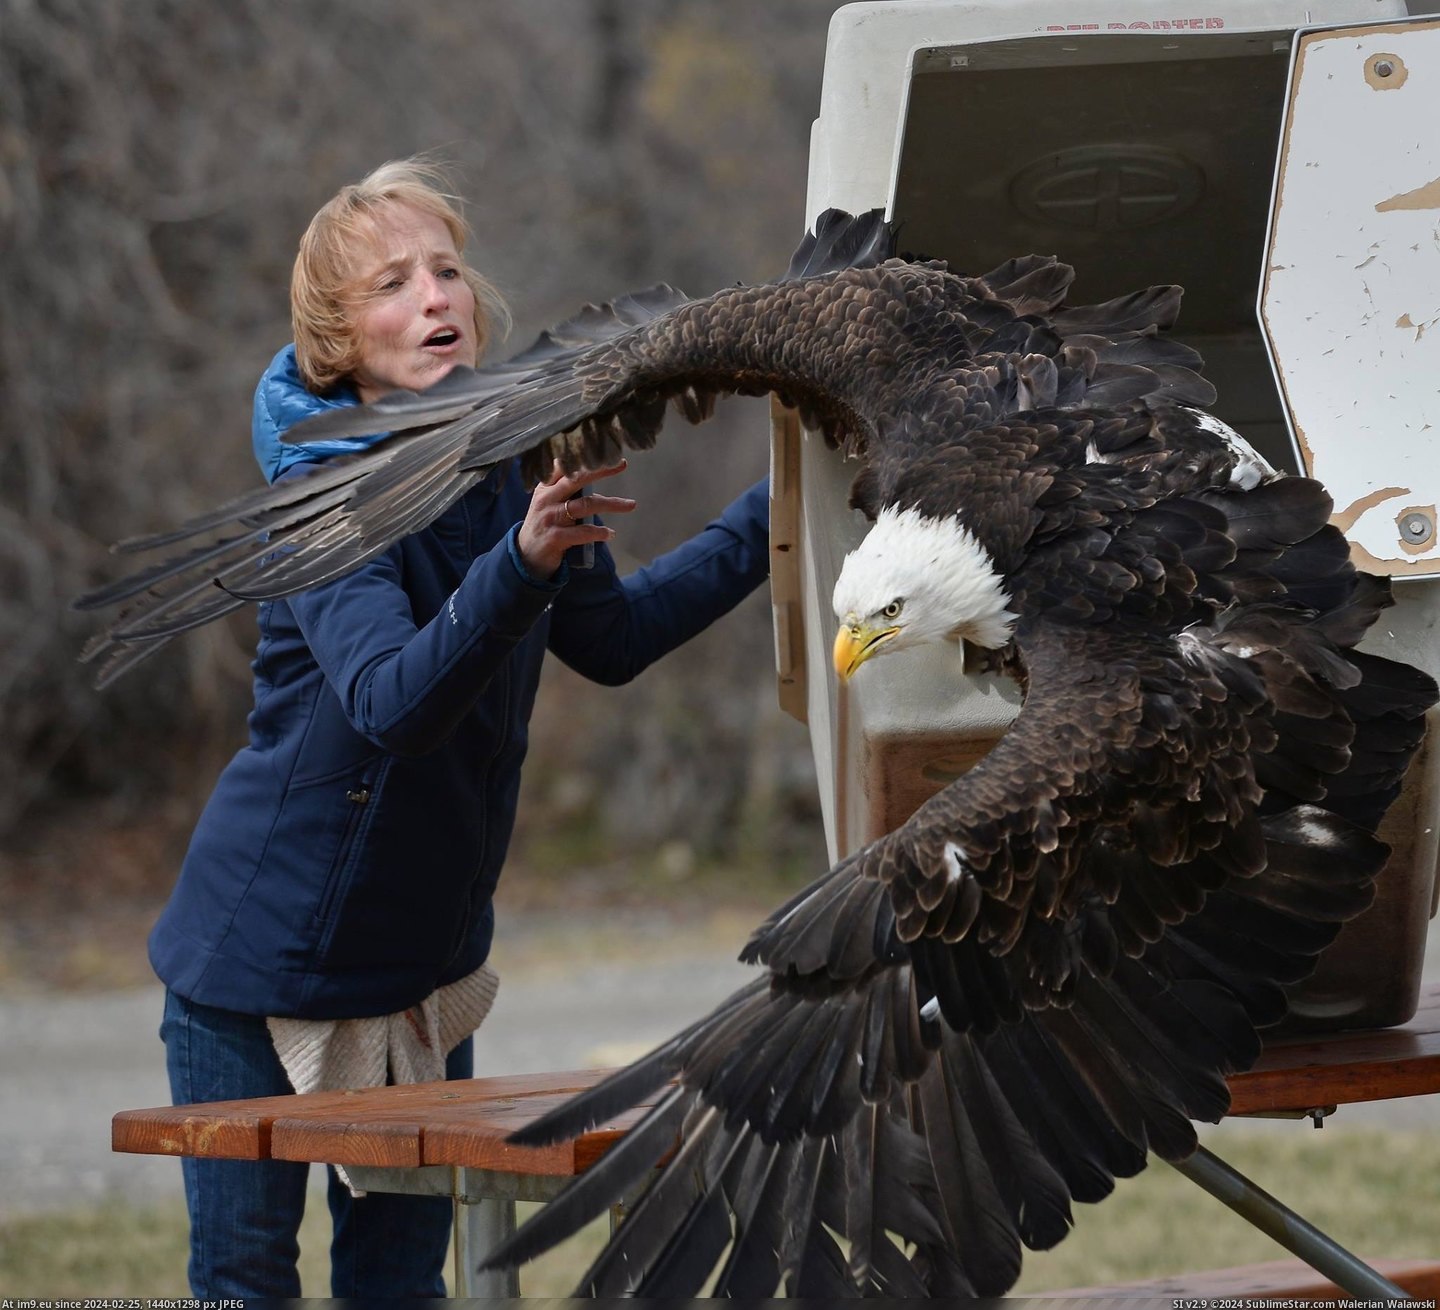 #Trap #Caught #Center #Released #Conservation #Montana #Eagle #Bald [Pics] This bald eagle was found caught in a trap and rehabilitated by the Montana Raptor Conservation Center. It was released b Pic. (Изображение из альбом My r/PICS favs))